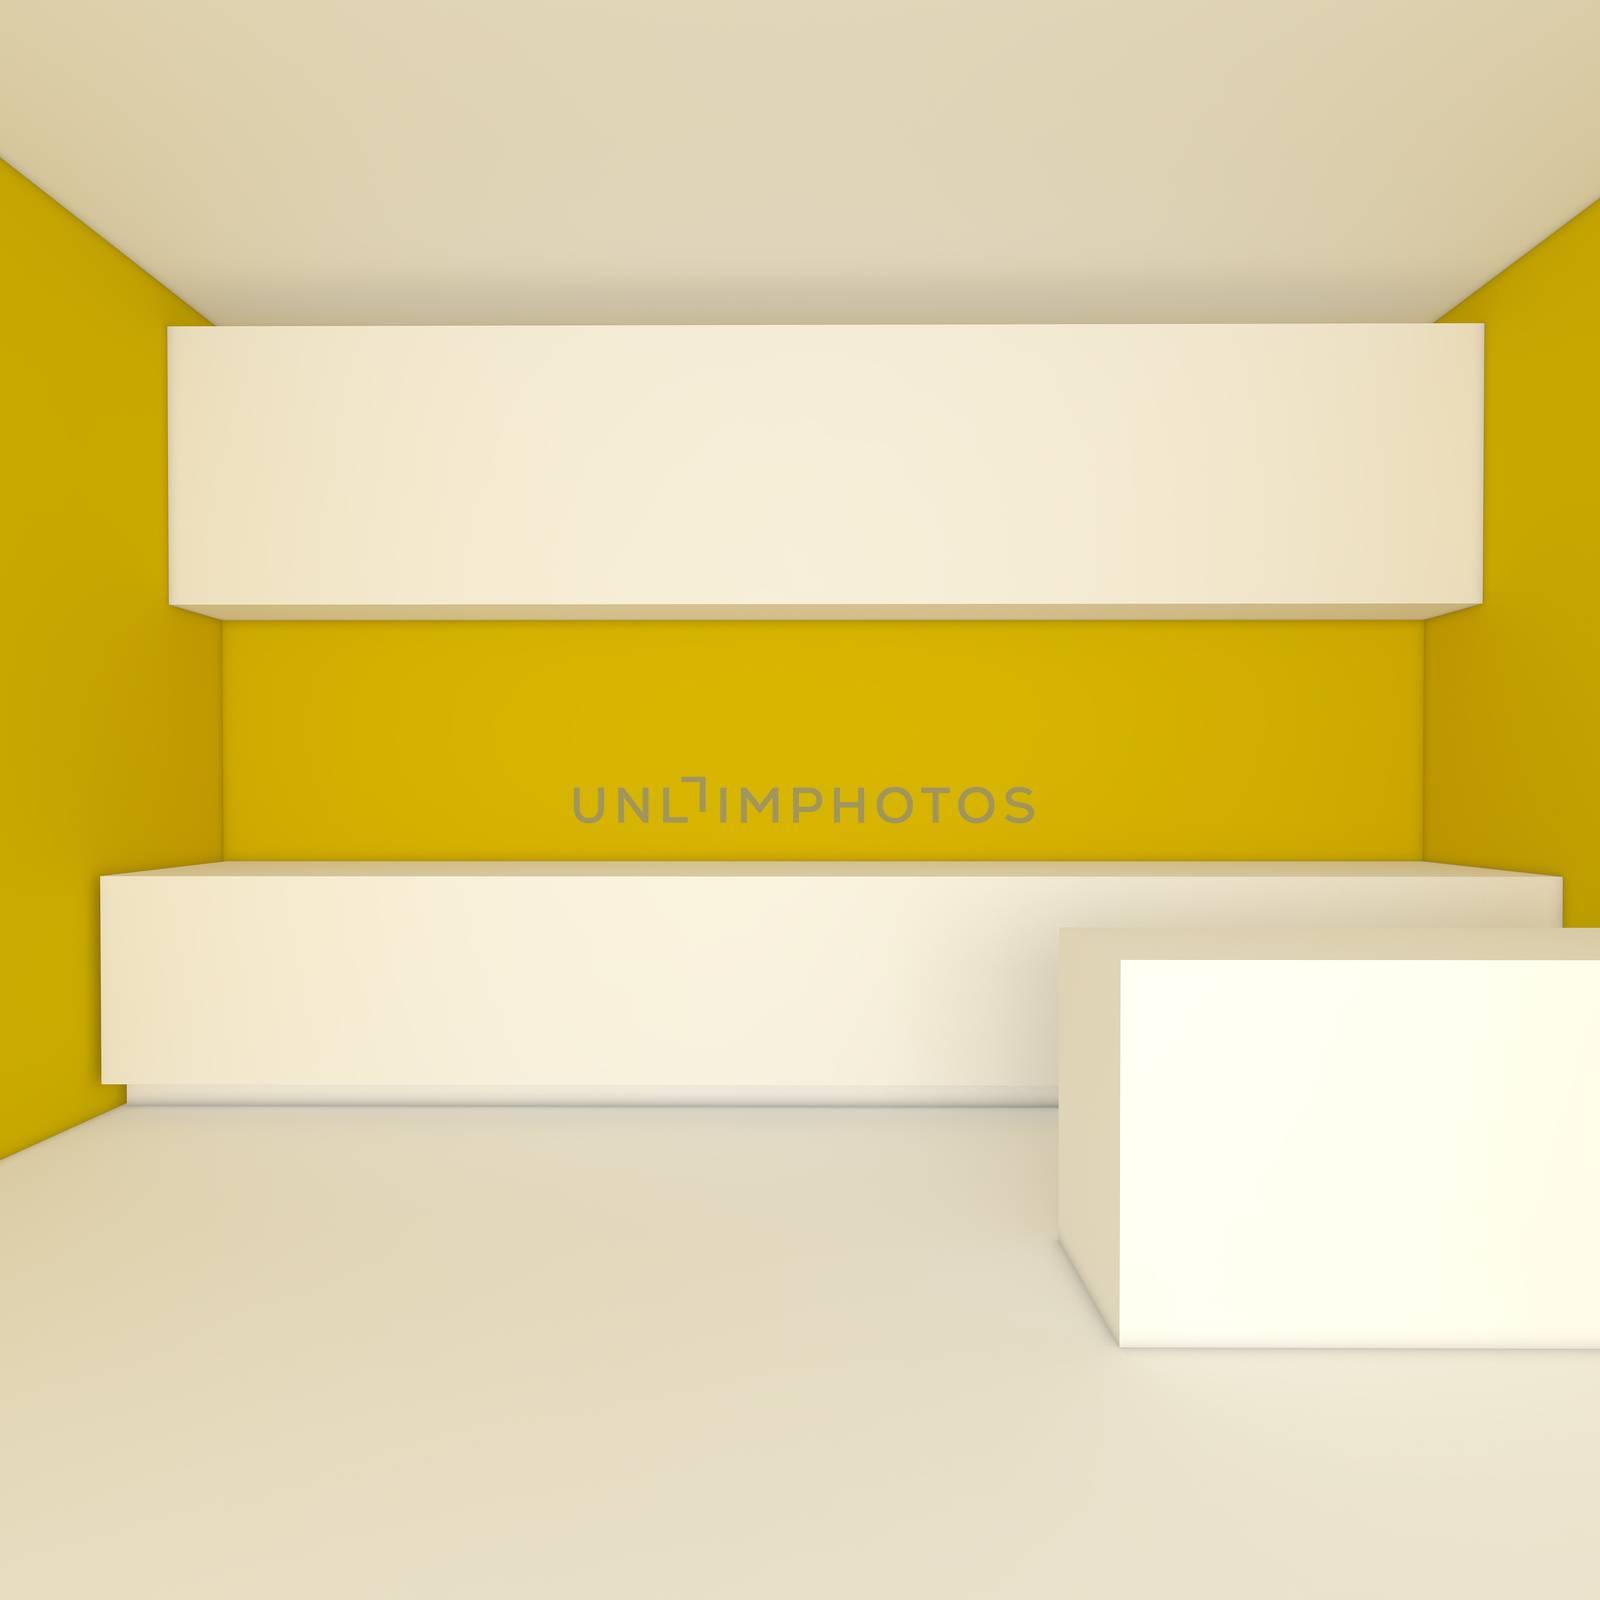 empty interior design for kitchen room with yellow wall.